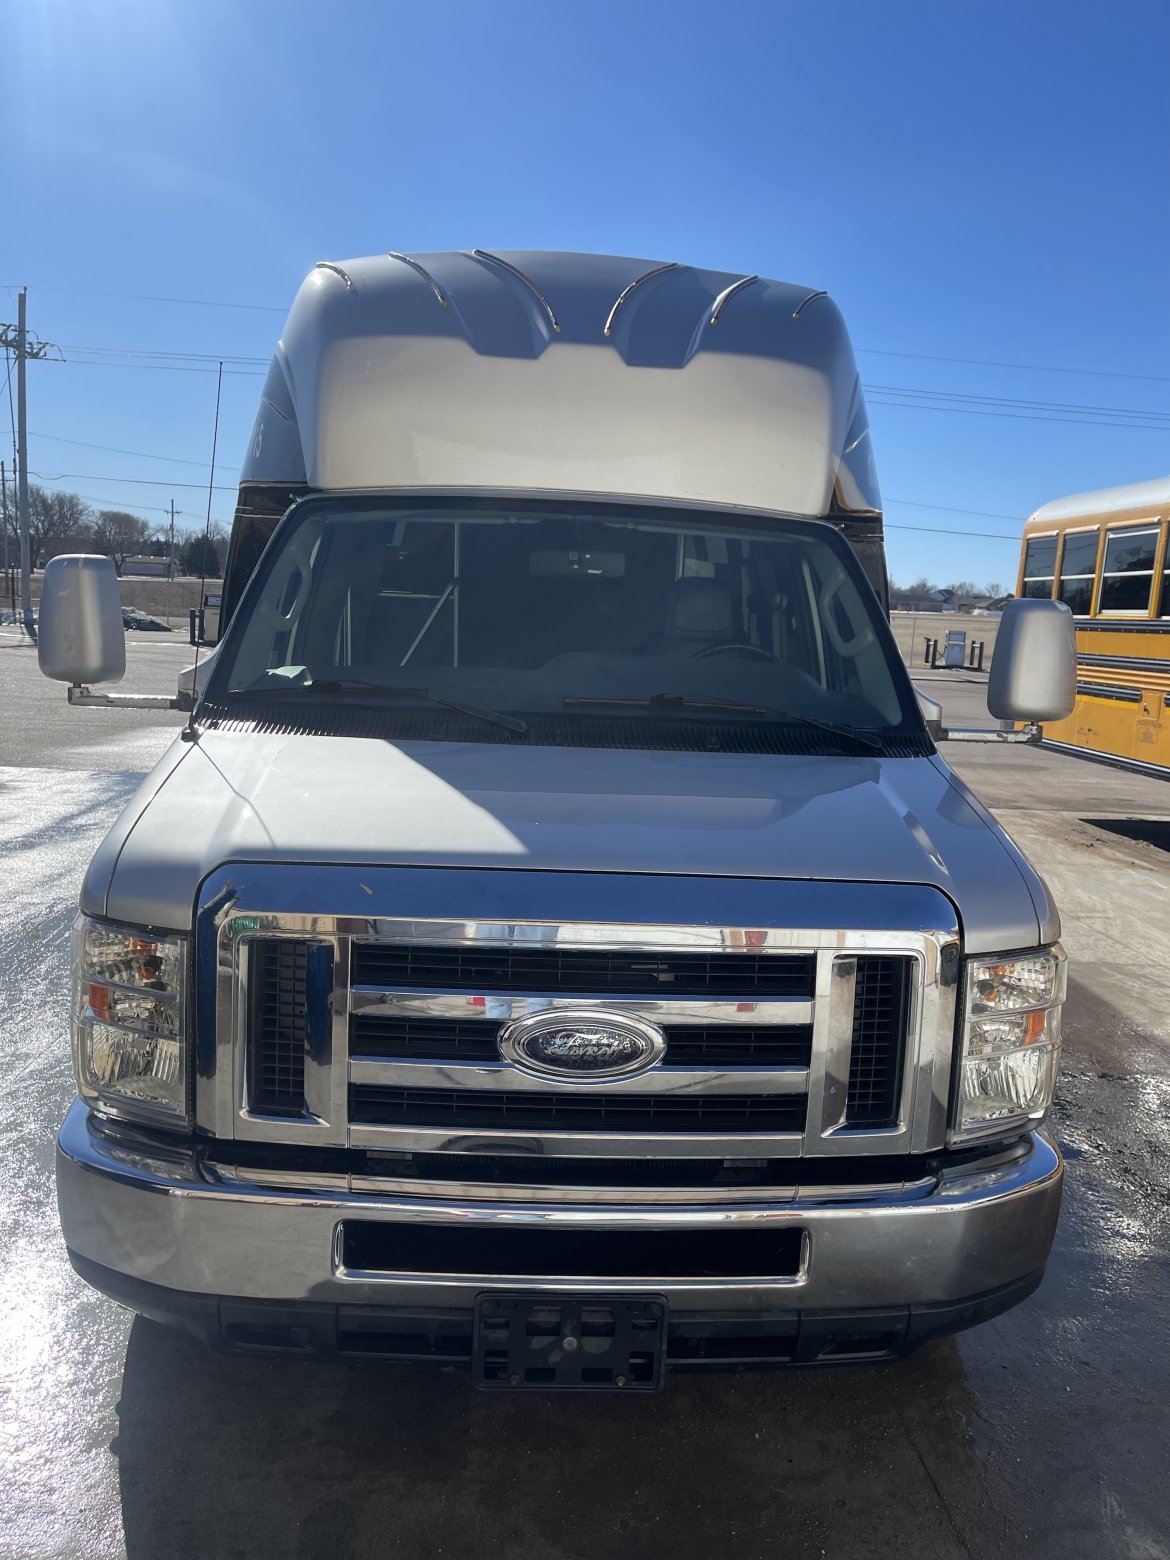 Executive Shuttle for sale: 2014 Ford E-450 by KSIR